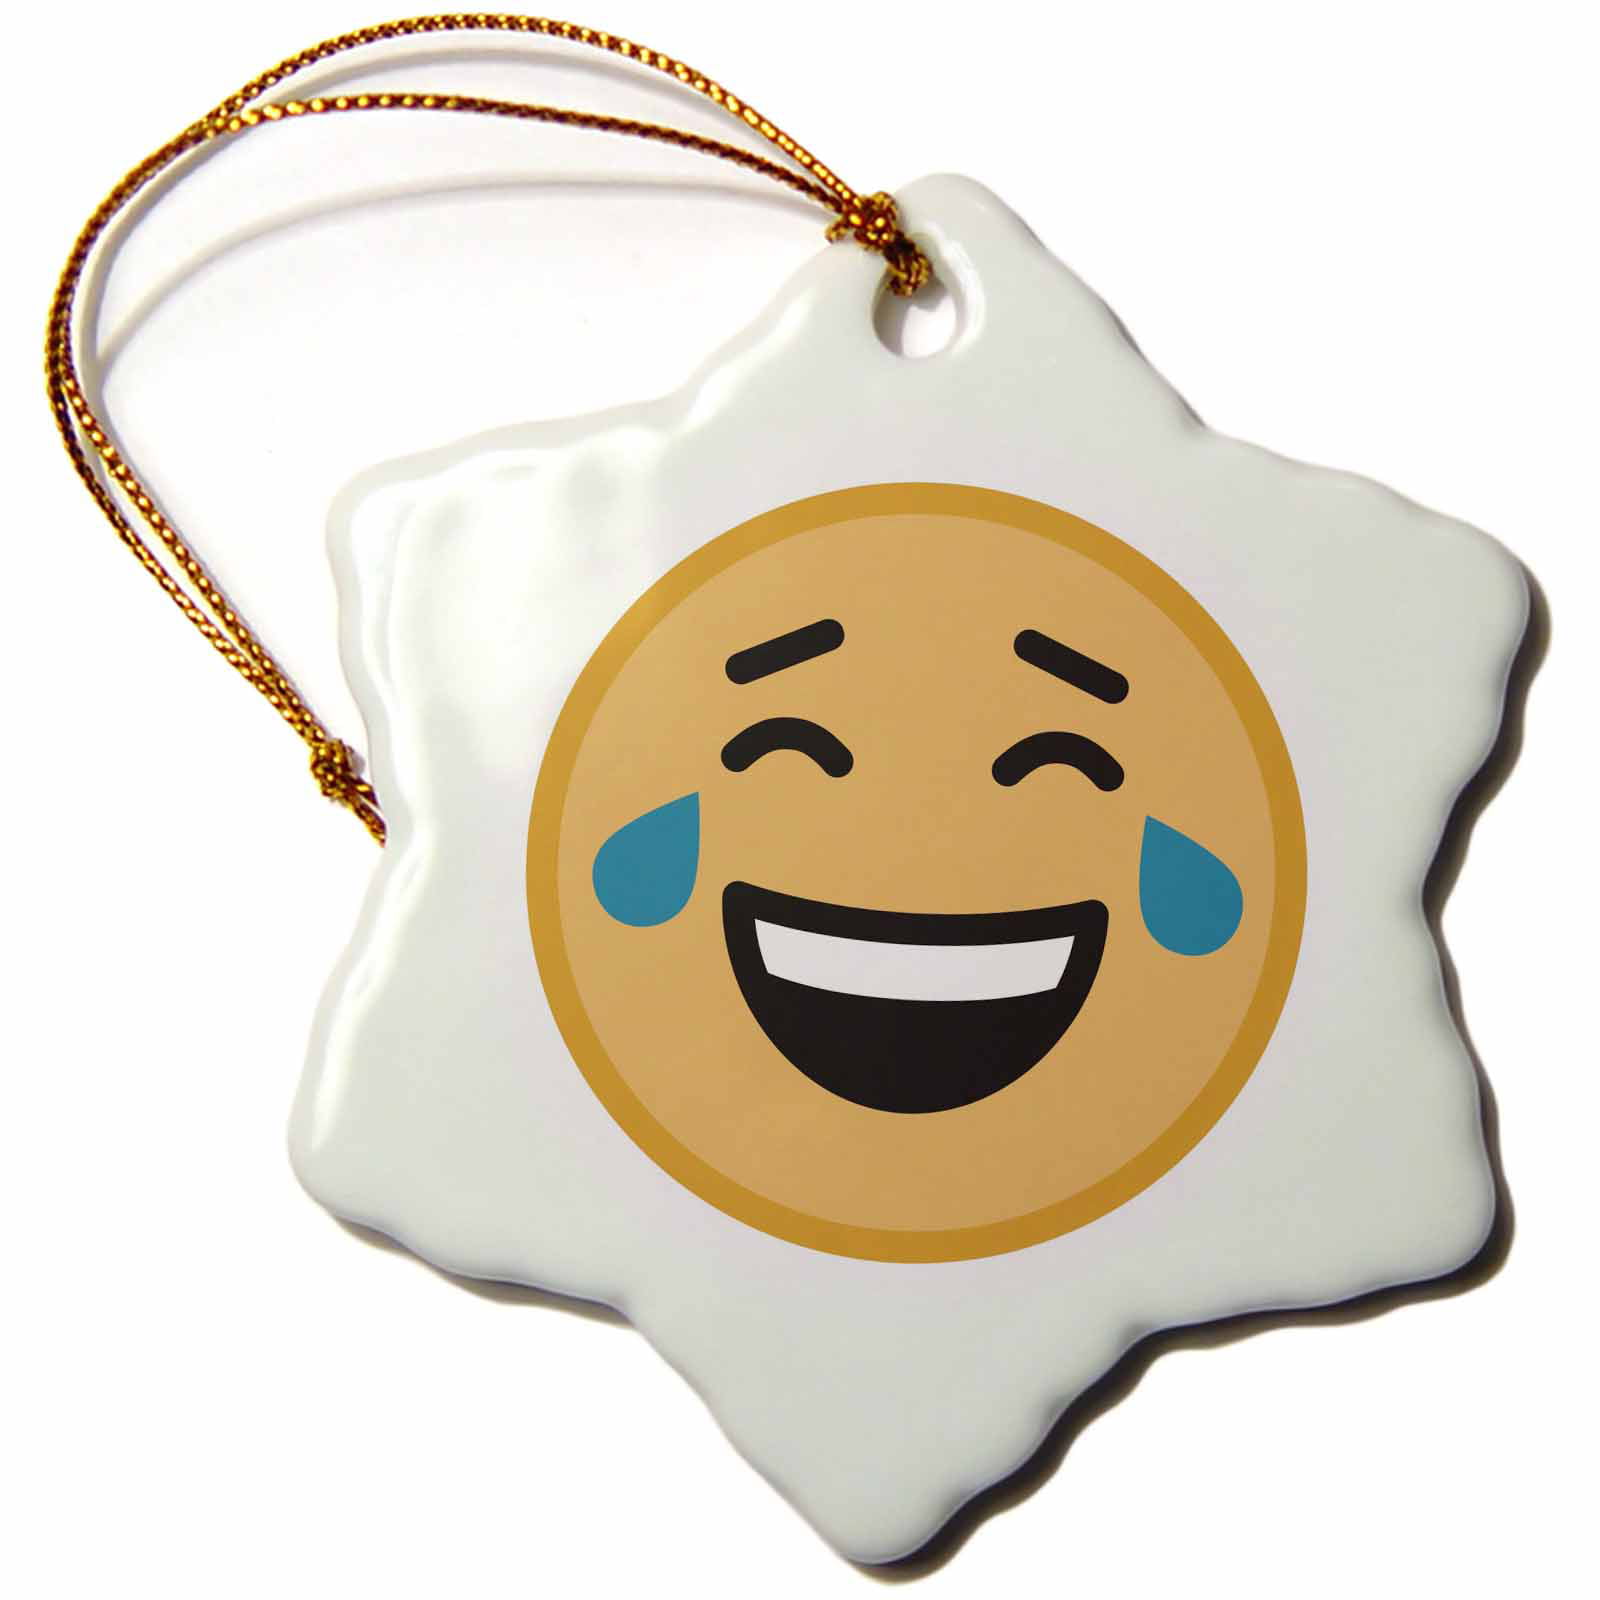 3dRose Crying laughing emoji, picture of laughing emoji on white background  - Snowflake Ornament, 3-inch 